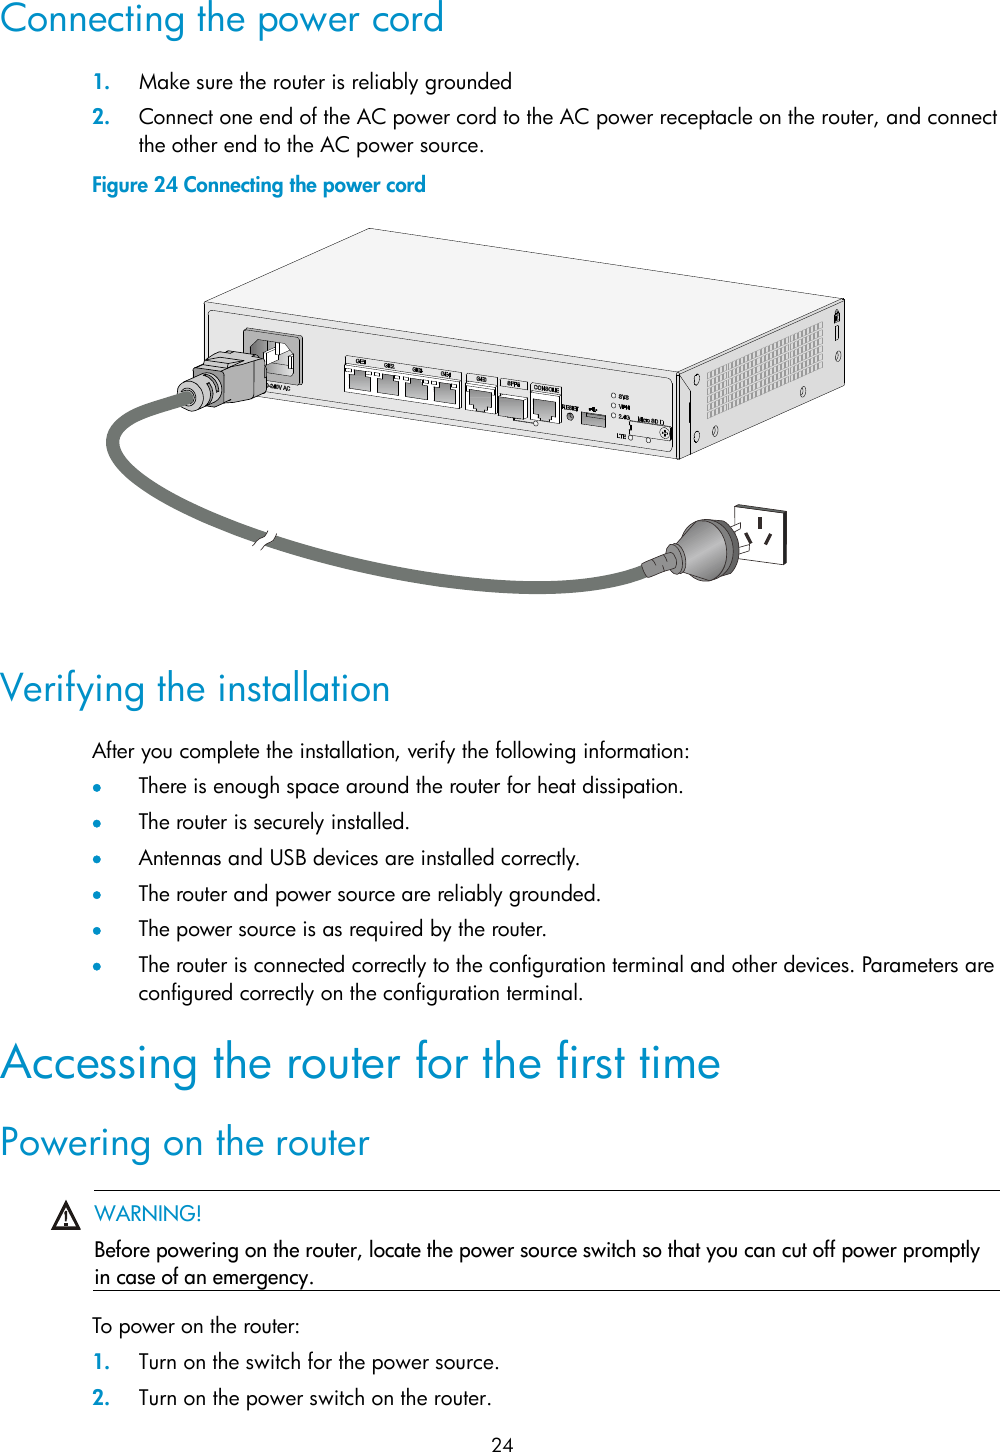  24 Connecting the power cord 1. Make sure the router is reliably grounded 2. Connect one end of the AC power cord to the AC power receptacle on the router, and connect the other end to the AC power source. Figure 24 Connecting the power cord   Verifying the installation After you complete the installation, verify the following information:  There is enough space around the router for heat dissipation.  The router is securely installed.  Antennas and USB devices are installed correctly.  The router and power source are reliably grounded.  The power source is as required by the router.  The router is connected correctly to the configuration terminal and other devices. Parameters are configured correctly on the configuration terminal. Accessing the router for the first time Powering on the router  WARNING! Before powering on the router, locate the power source switch so that you can cut off power promptly in case of an emergency.   To power on the router: 1. Turn on the switch for the power source. 2. Turn on the power switch on the router. 